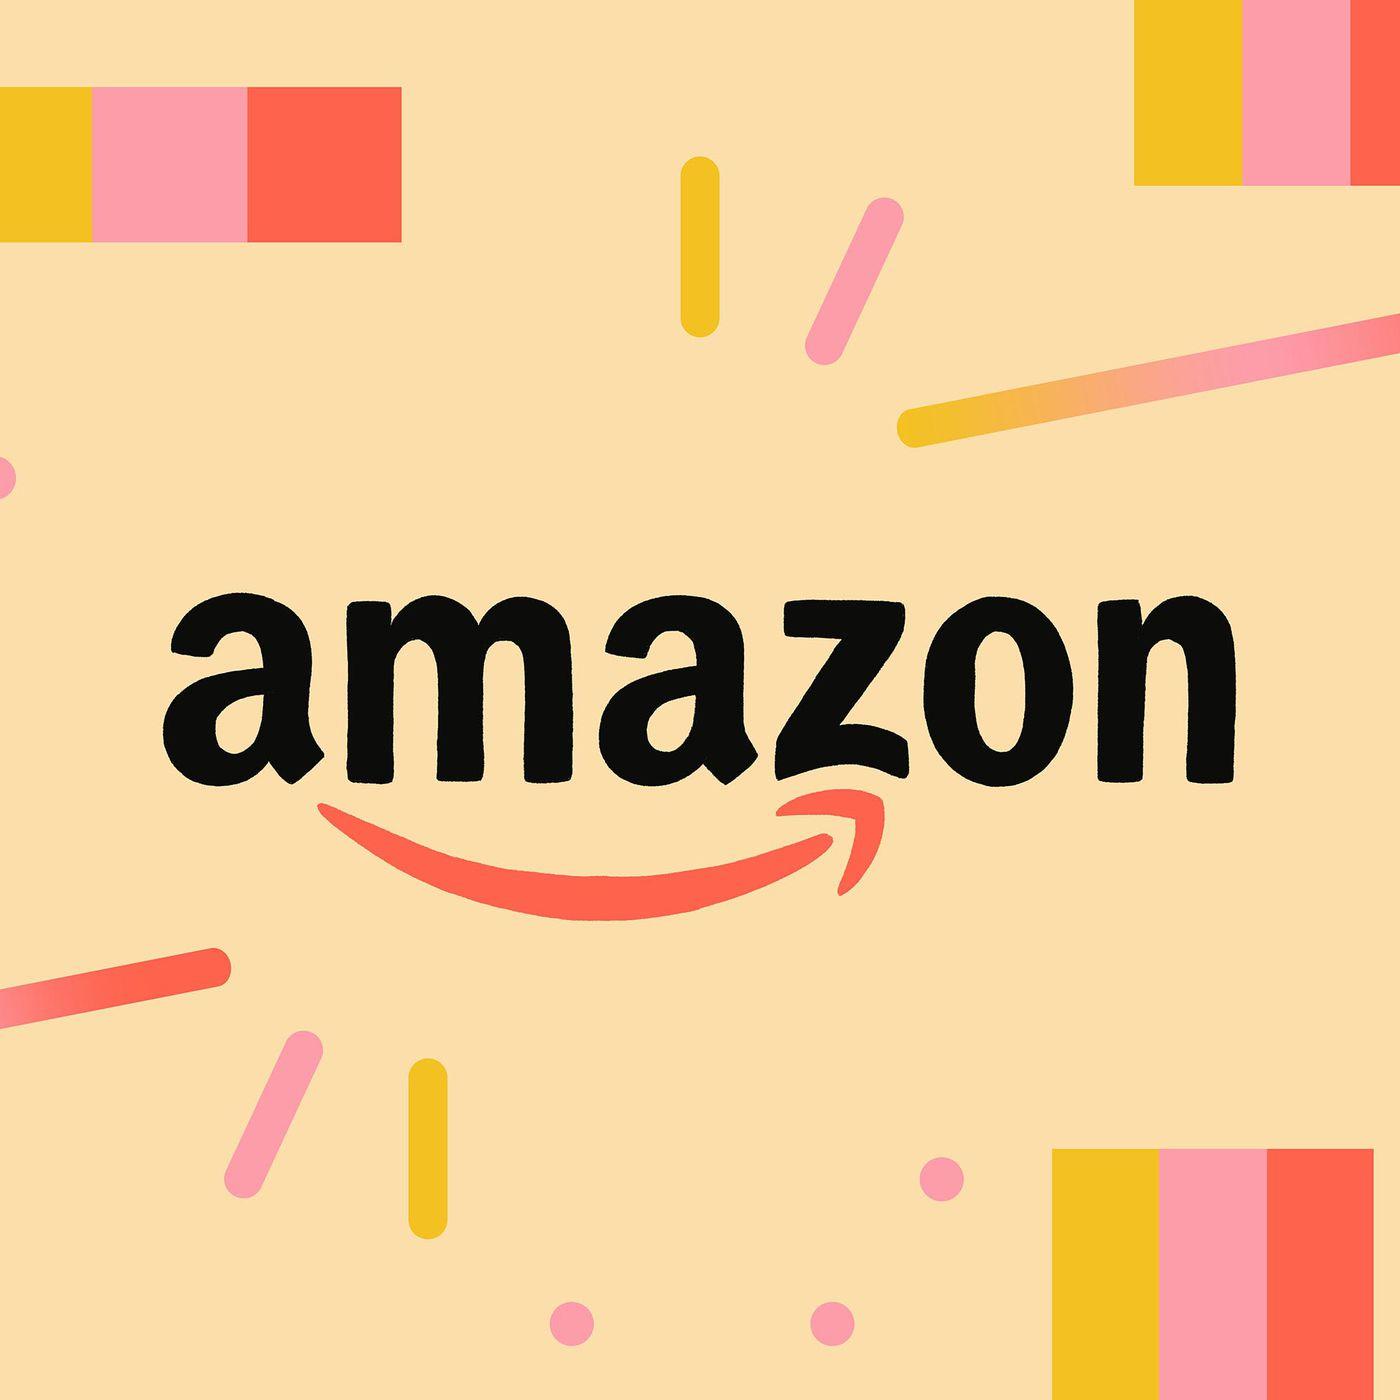 Amazon Music Logo - Amazon Prime Day 2019: When does it start and end?